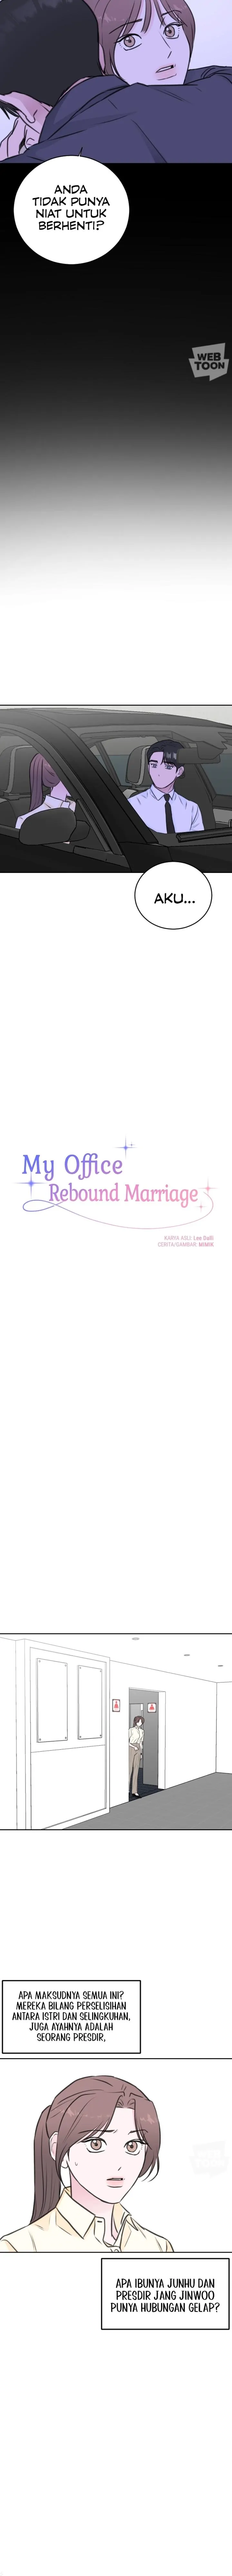 My Office Rebound Marriage - Page 2